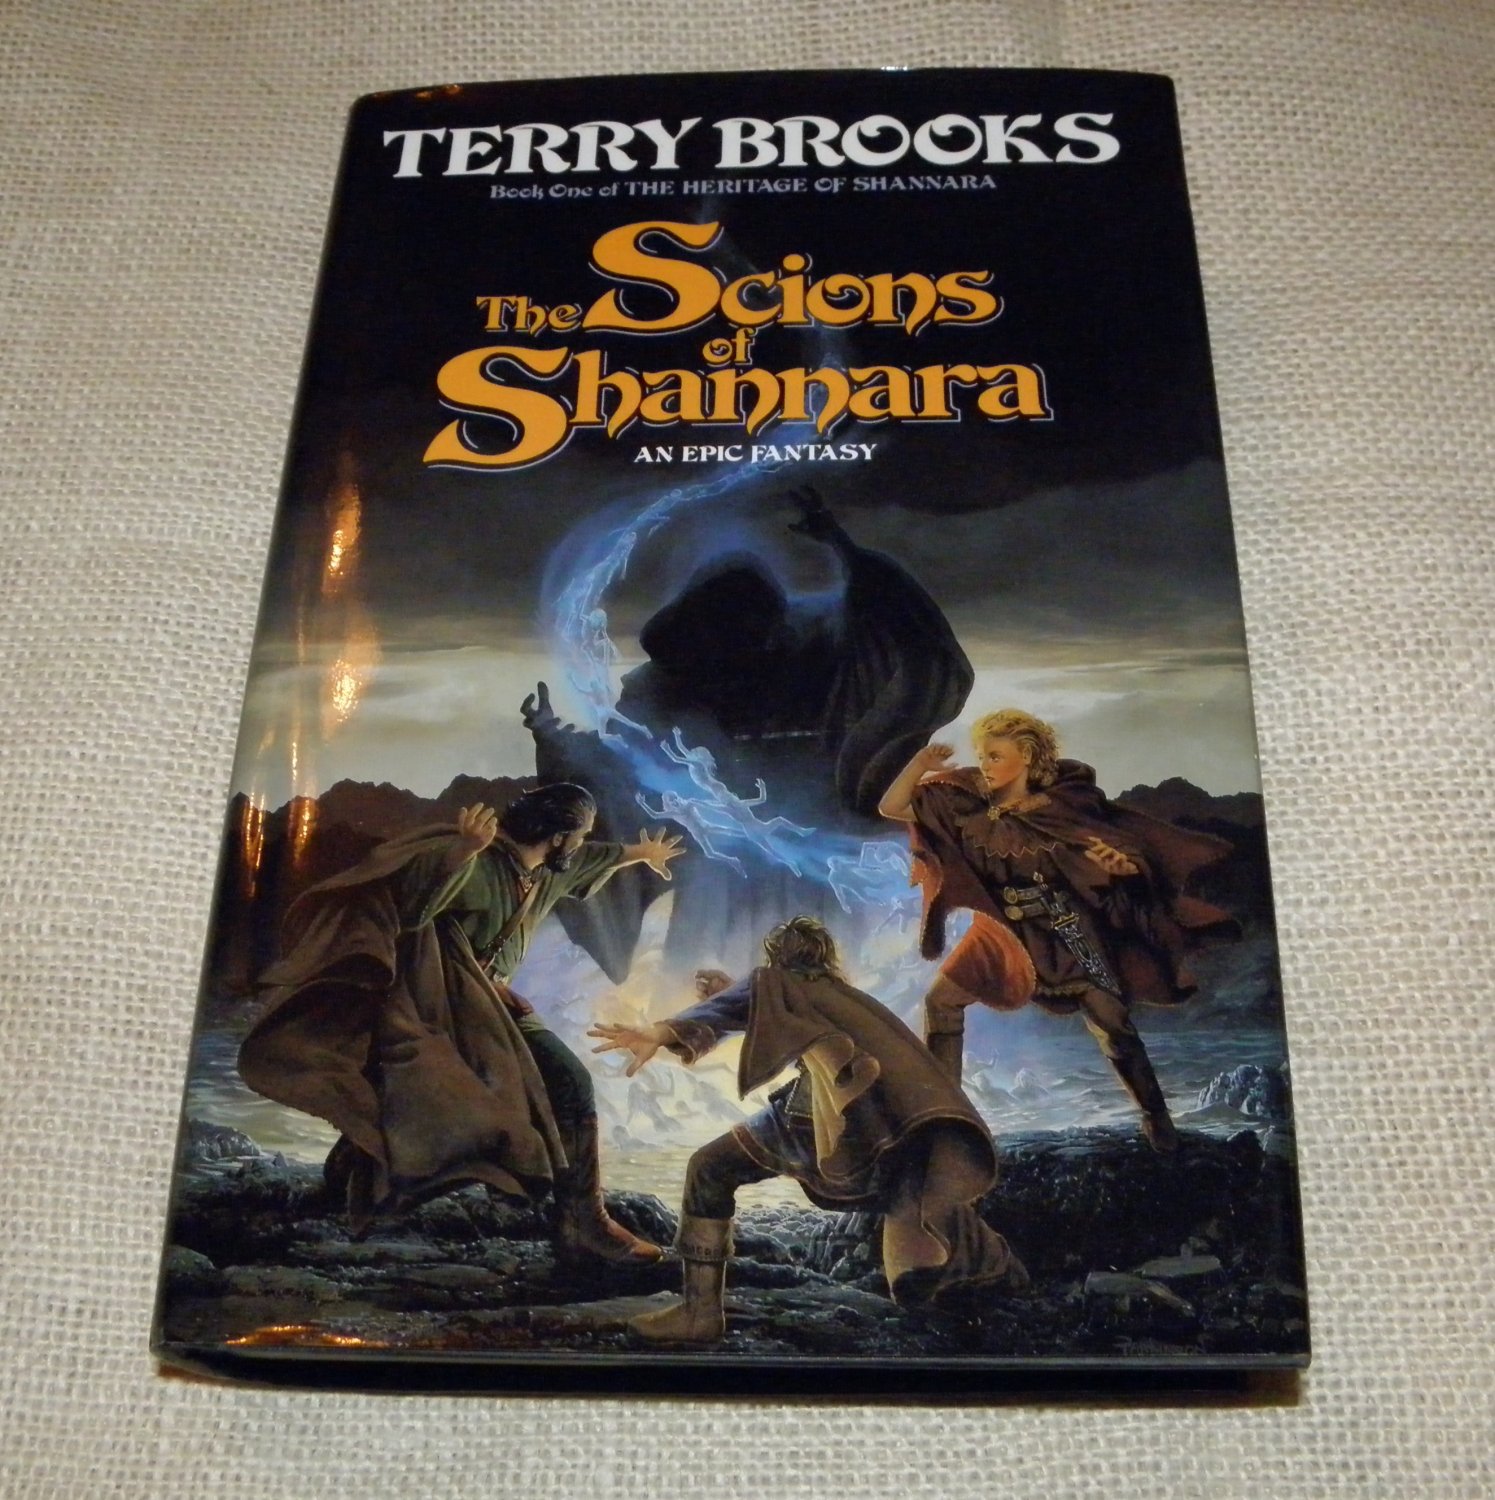 download terry brooks the scions of shannara